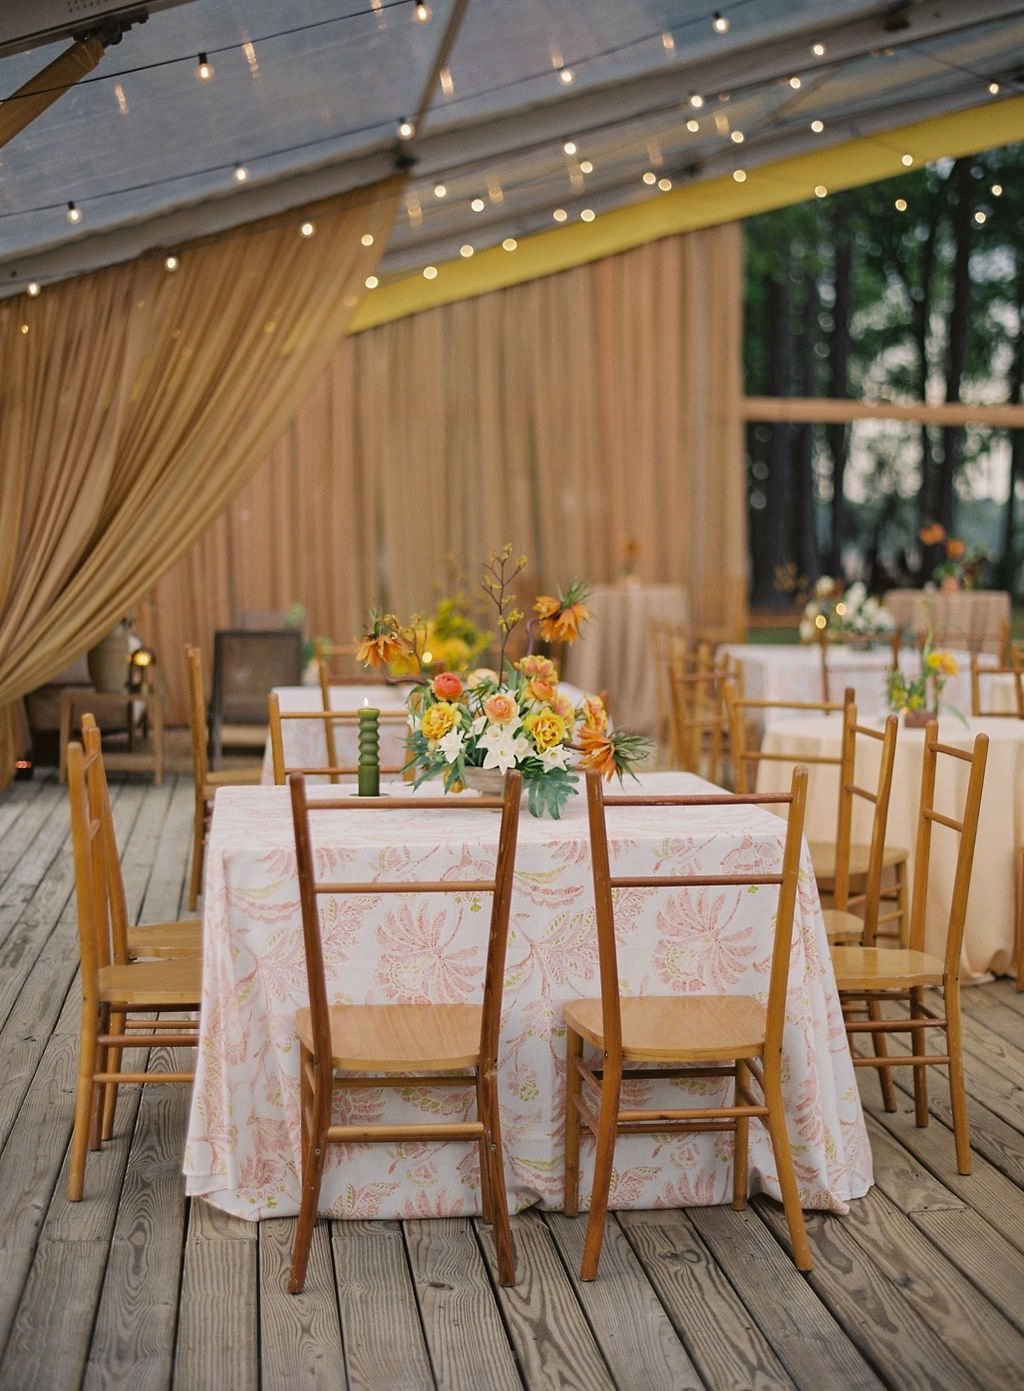 Elevate your party with these luxurious divider drapes ✨
.
.
.
#elevateyourparty #dividerdrapes #goldcurtains #golddraping #mustarddraping #mustardvalance #weddingreception #goldwedding #boldwedding #yellowfloral #yellowflowers #pipeanddrape #eventdr